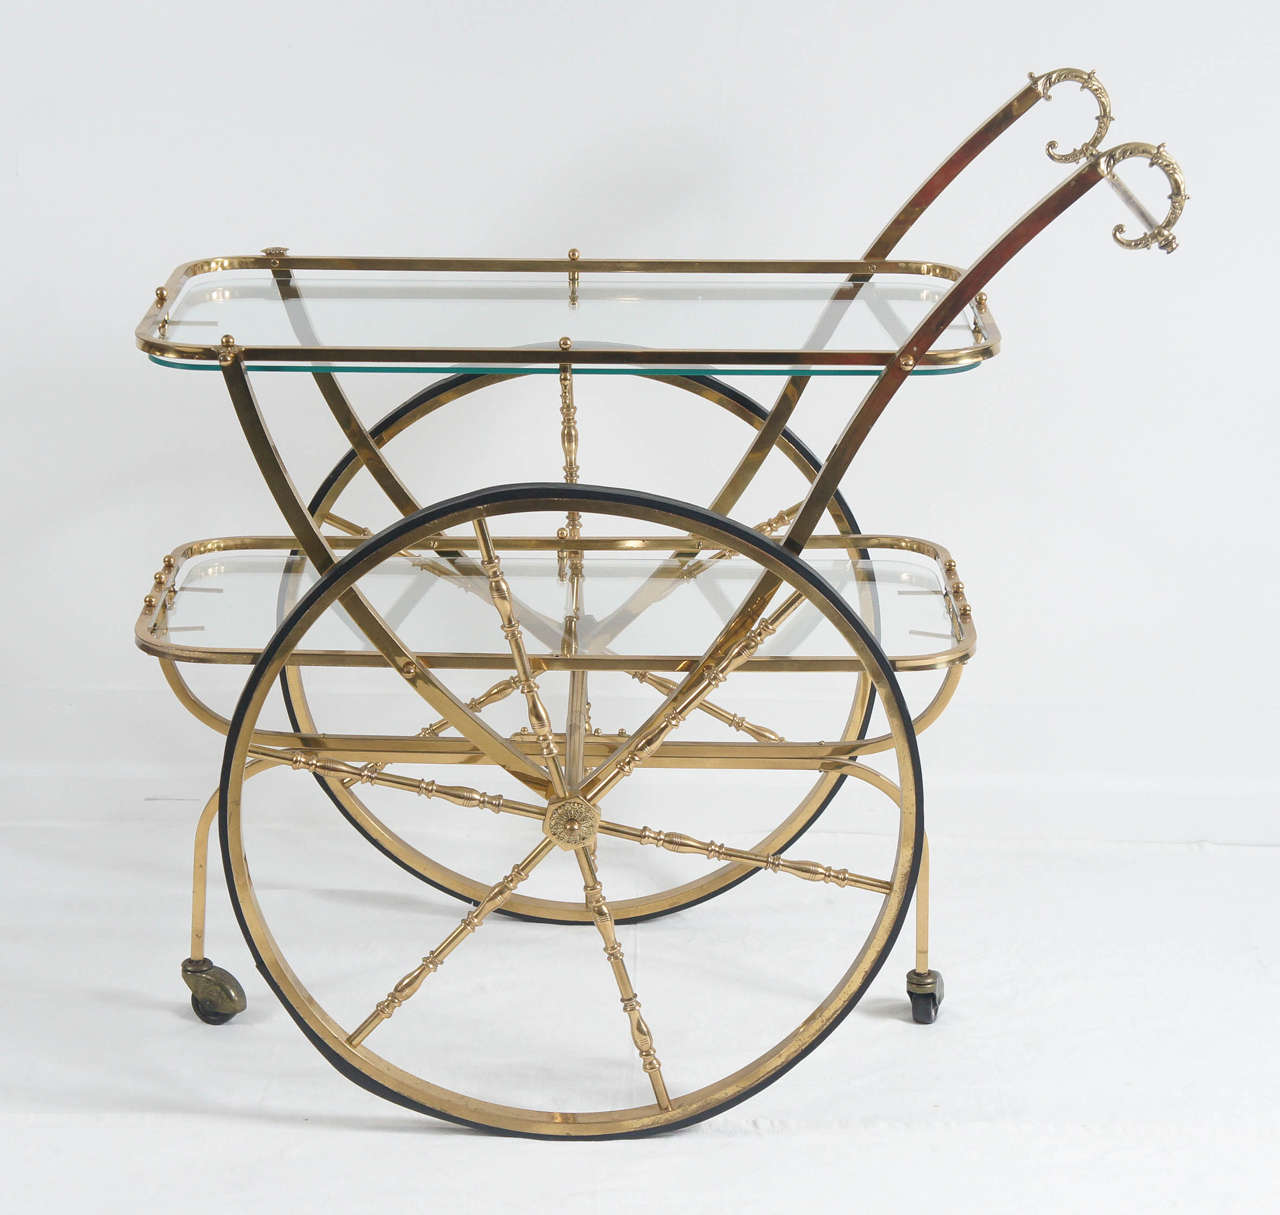 these carts are so fun.
Use for a bar, roll in tea and deserts, use as an occasional table.
Nice patina to brass. Shows age well.